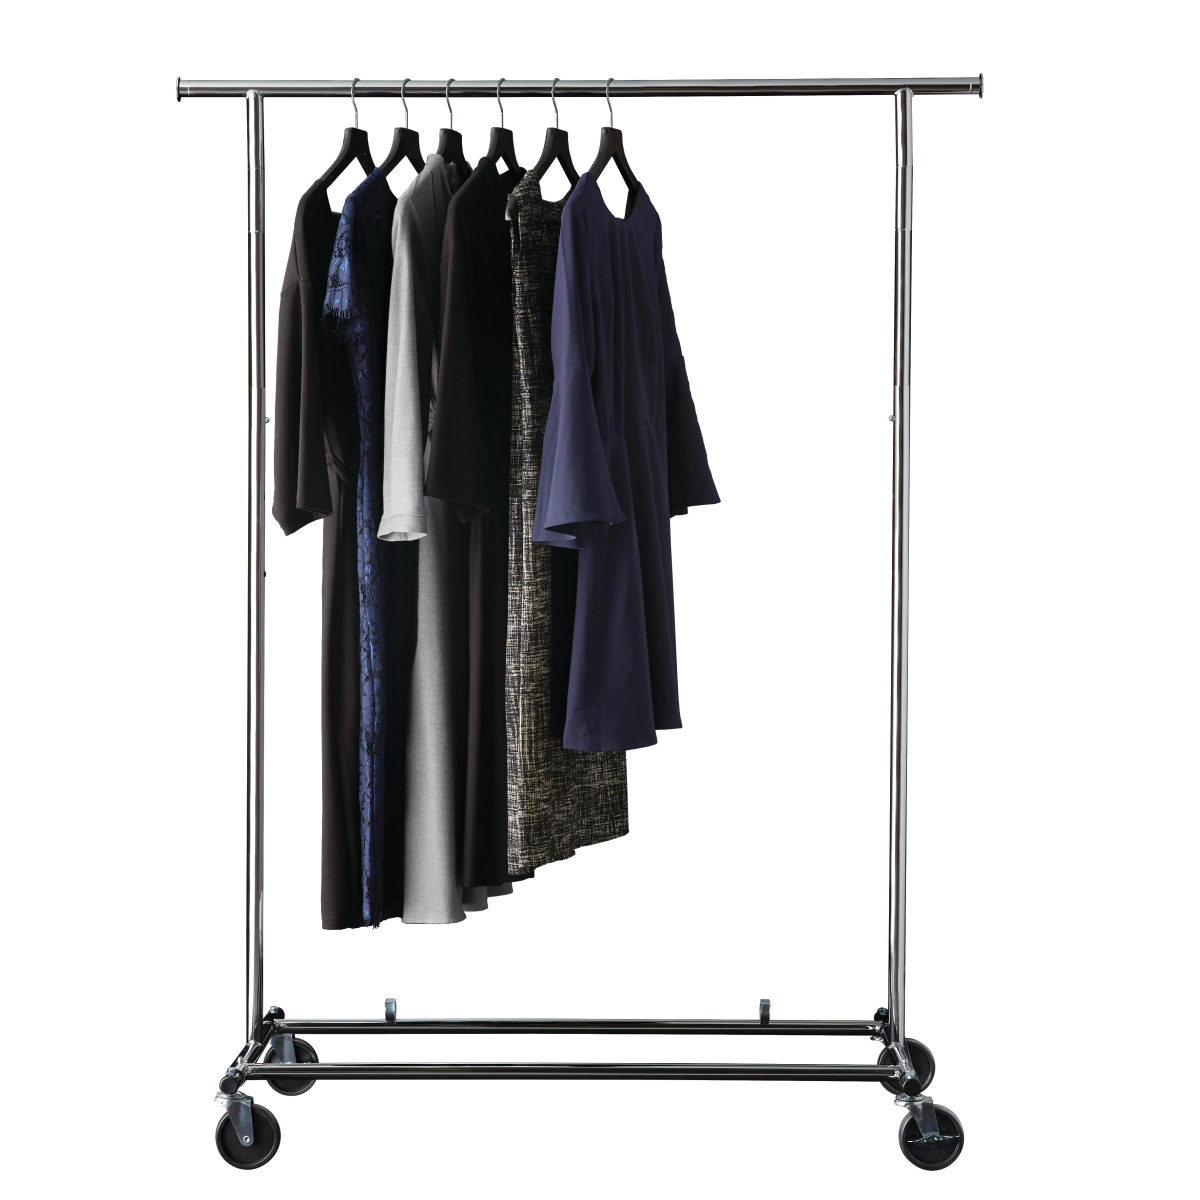 https://www.containerstore.com/catalogimages/517906/10017543-folding-commercial-garment-.jpg